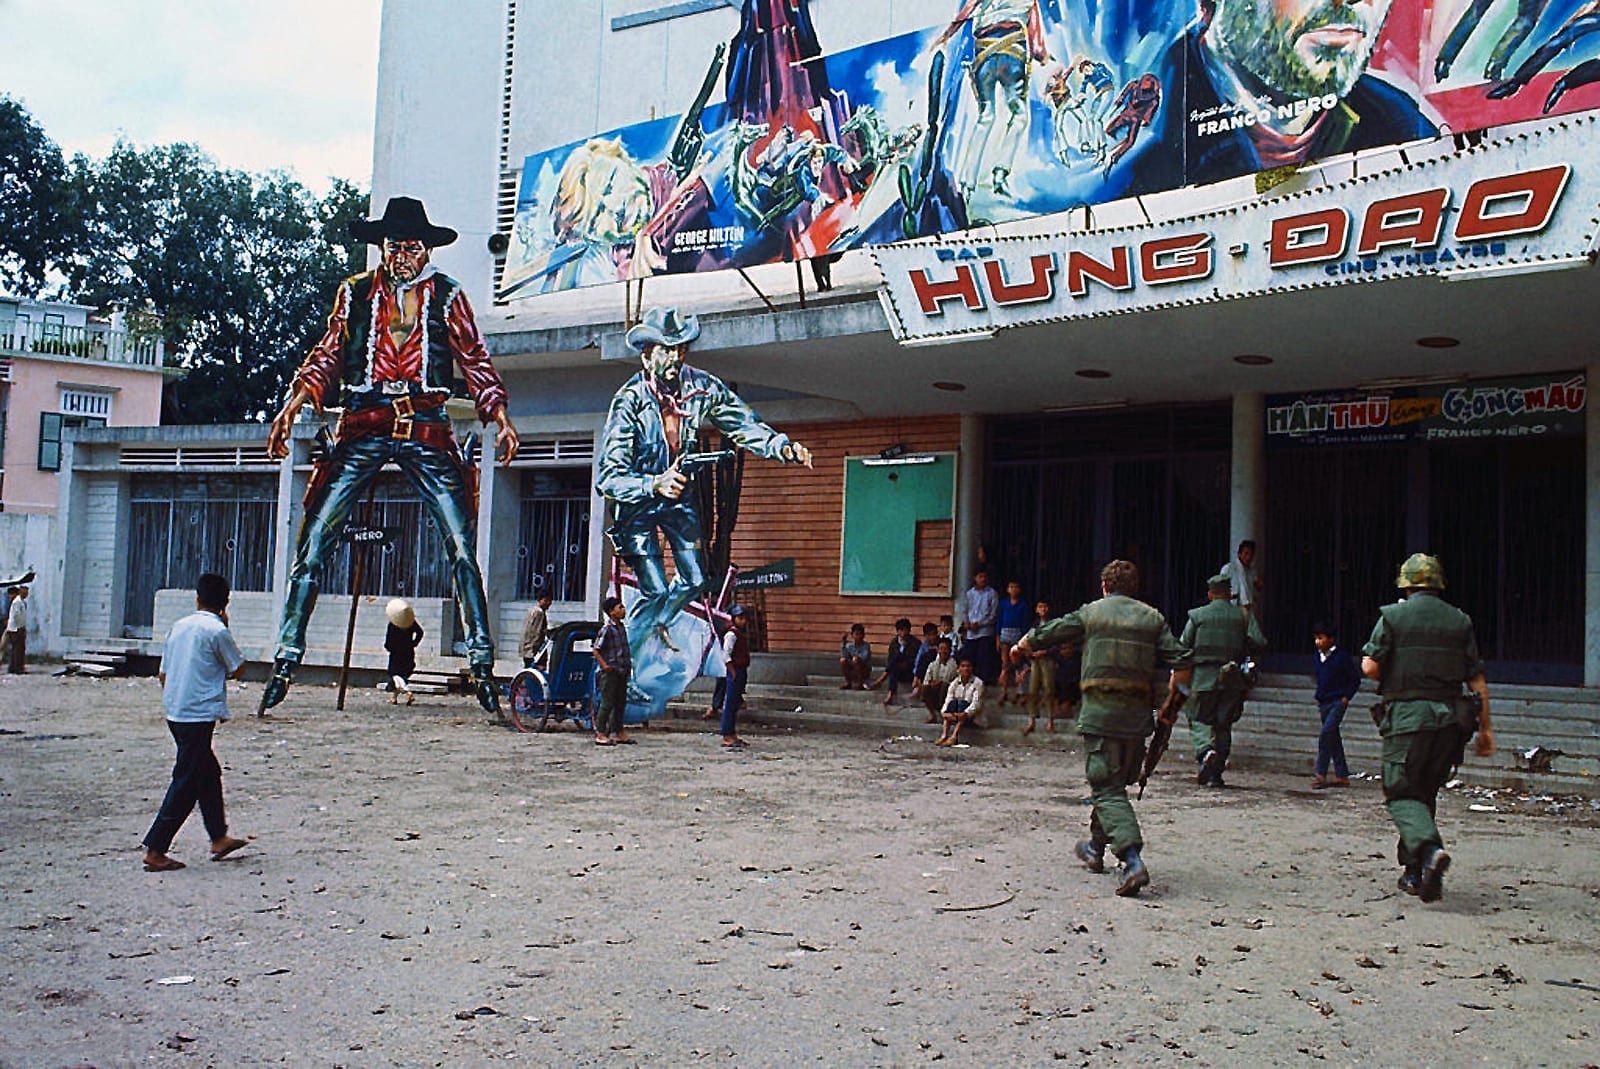 US Marines approach a theater with Western figures outside it